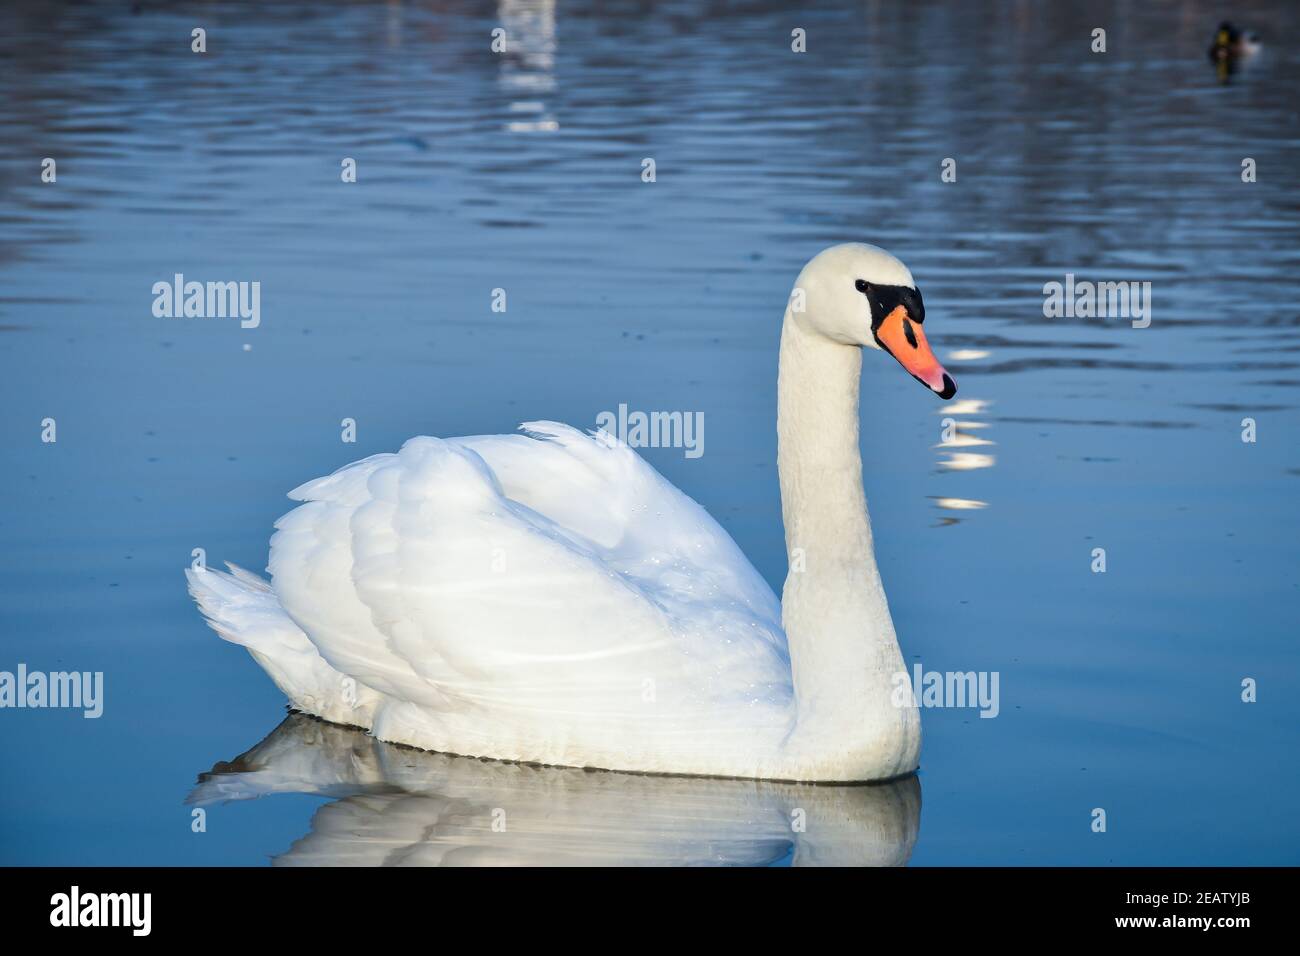 eye-level shot of a single beautiful white swan floating on a calm water surface Stock Photo